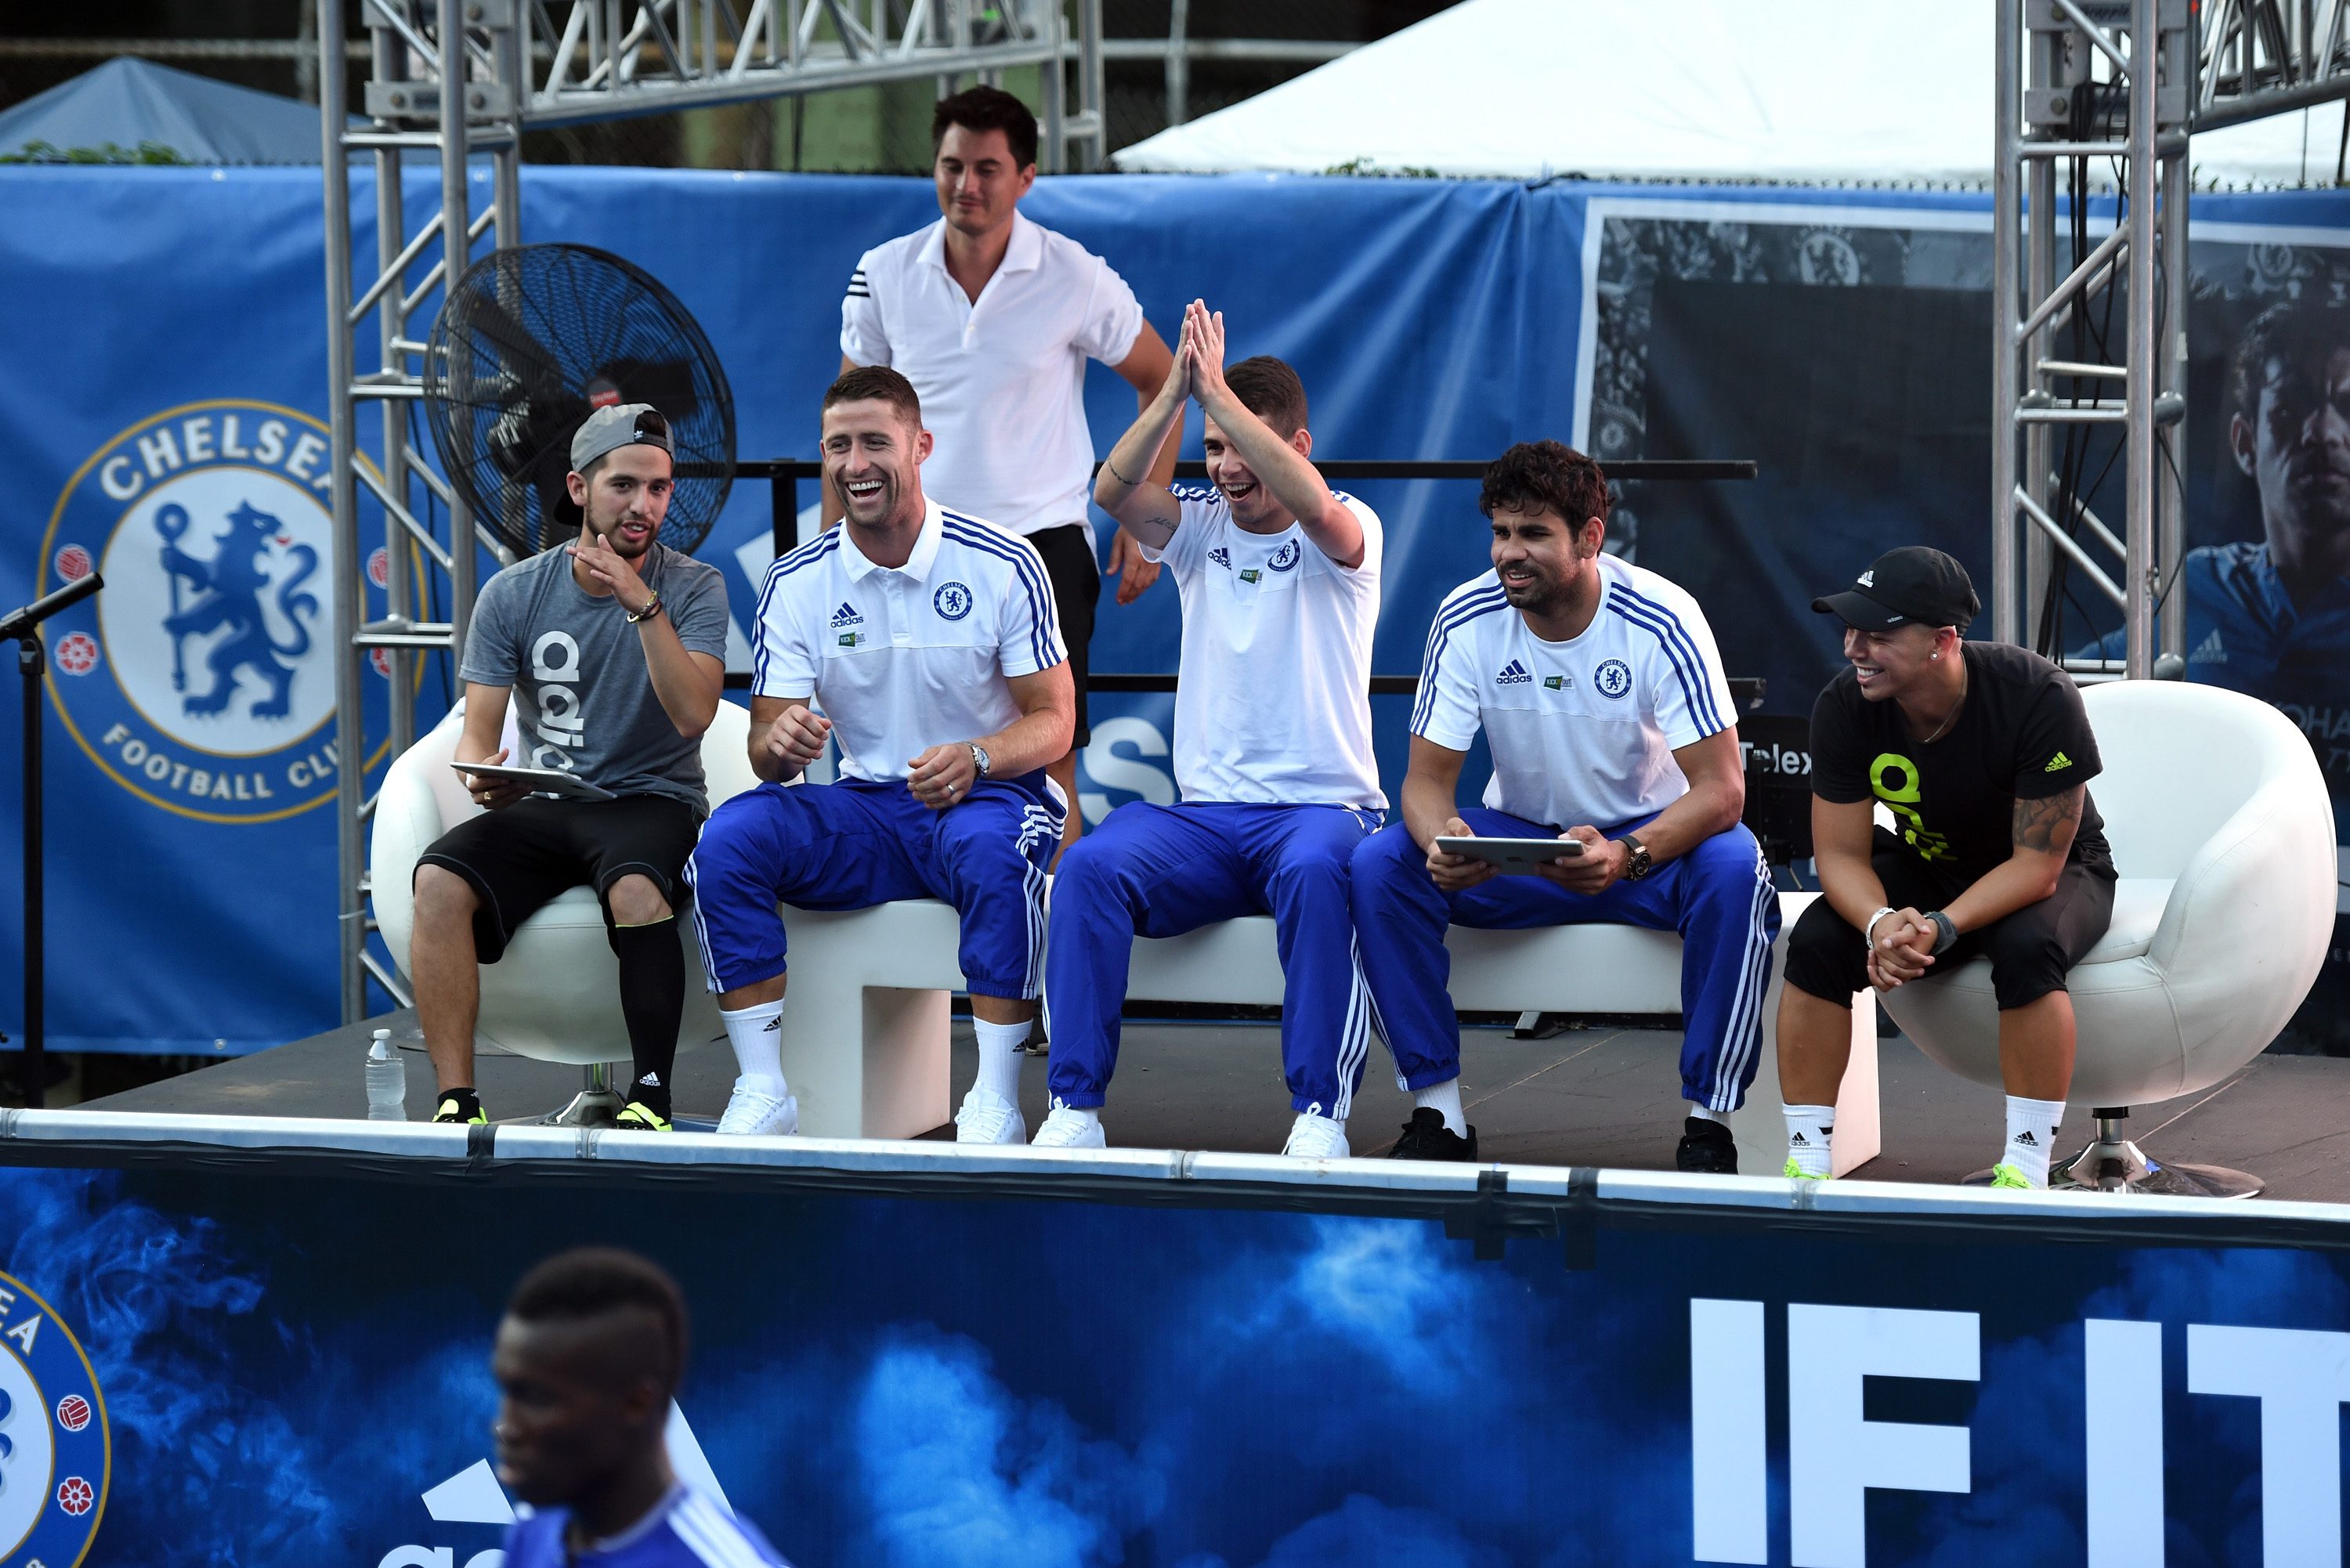 Chelsea's Gary Cahill, Oscar, Diego Costa during the Adidas Be The Difference Event on 21st July 2015 at the FC Harlem Training Ground in Harlem, New York, USA.